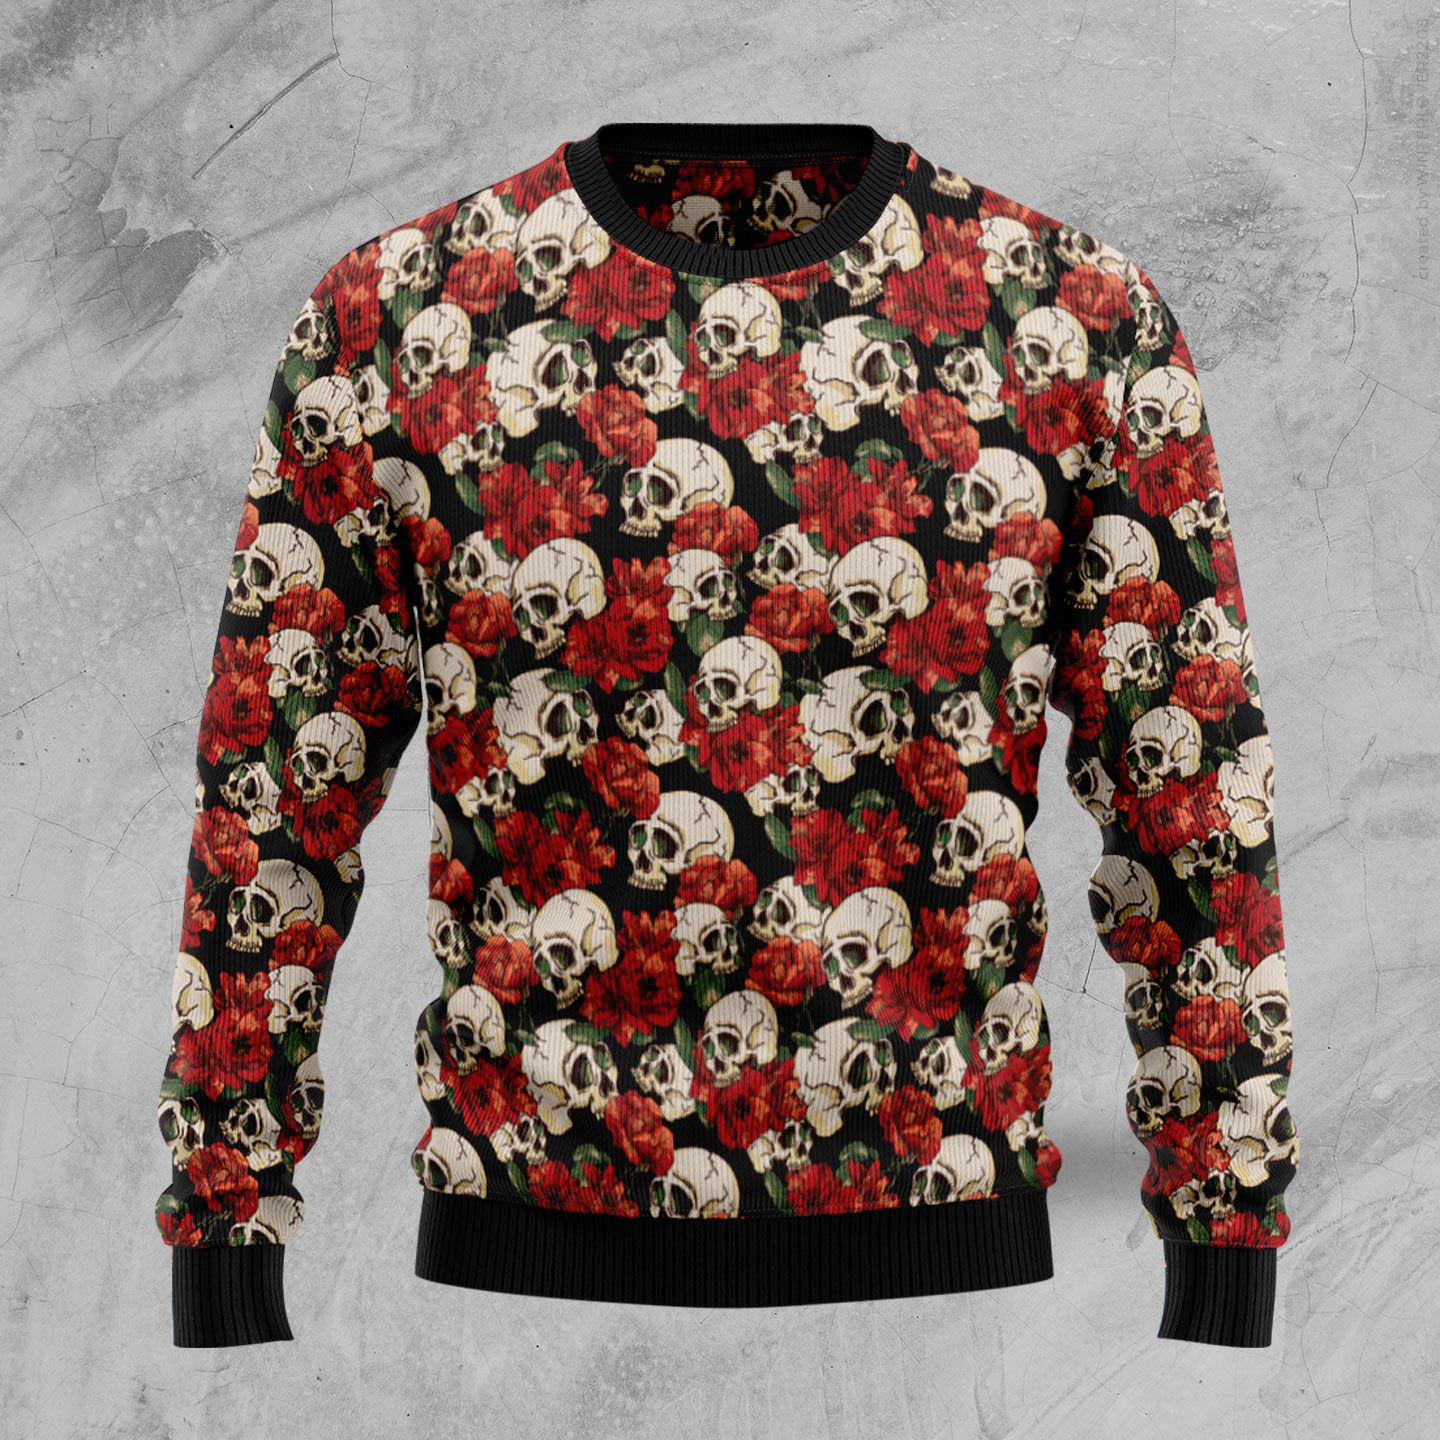 Floral Skull Ugly Christmas Sweater Ugly Sweater For Men Women, Holiday Sweater